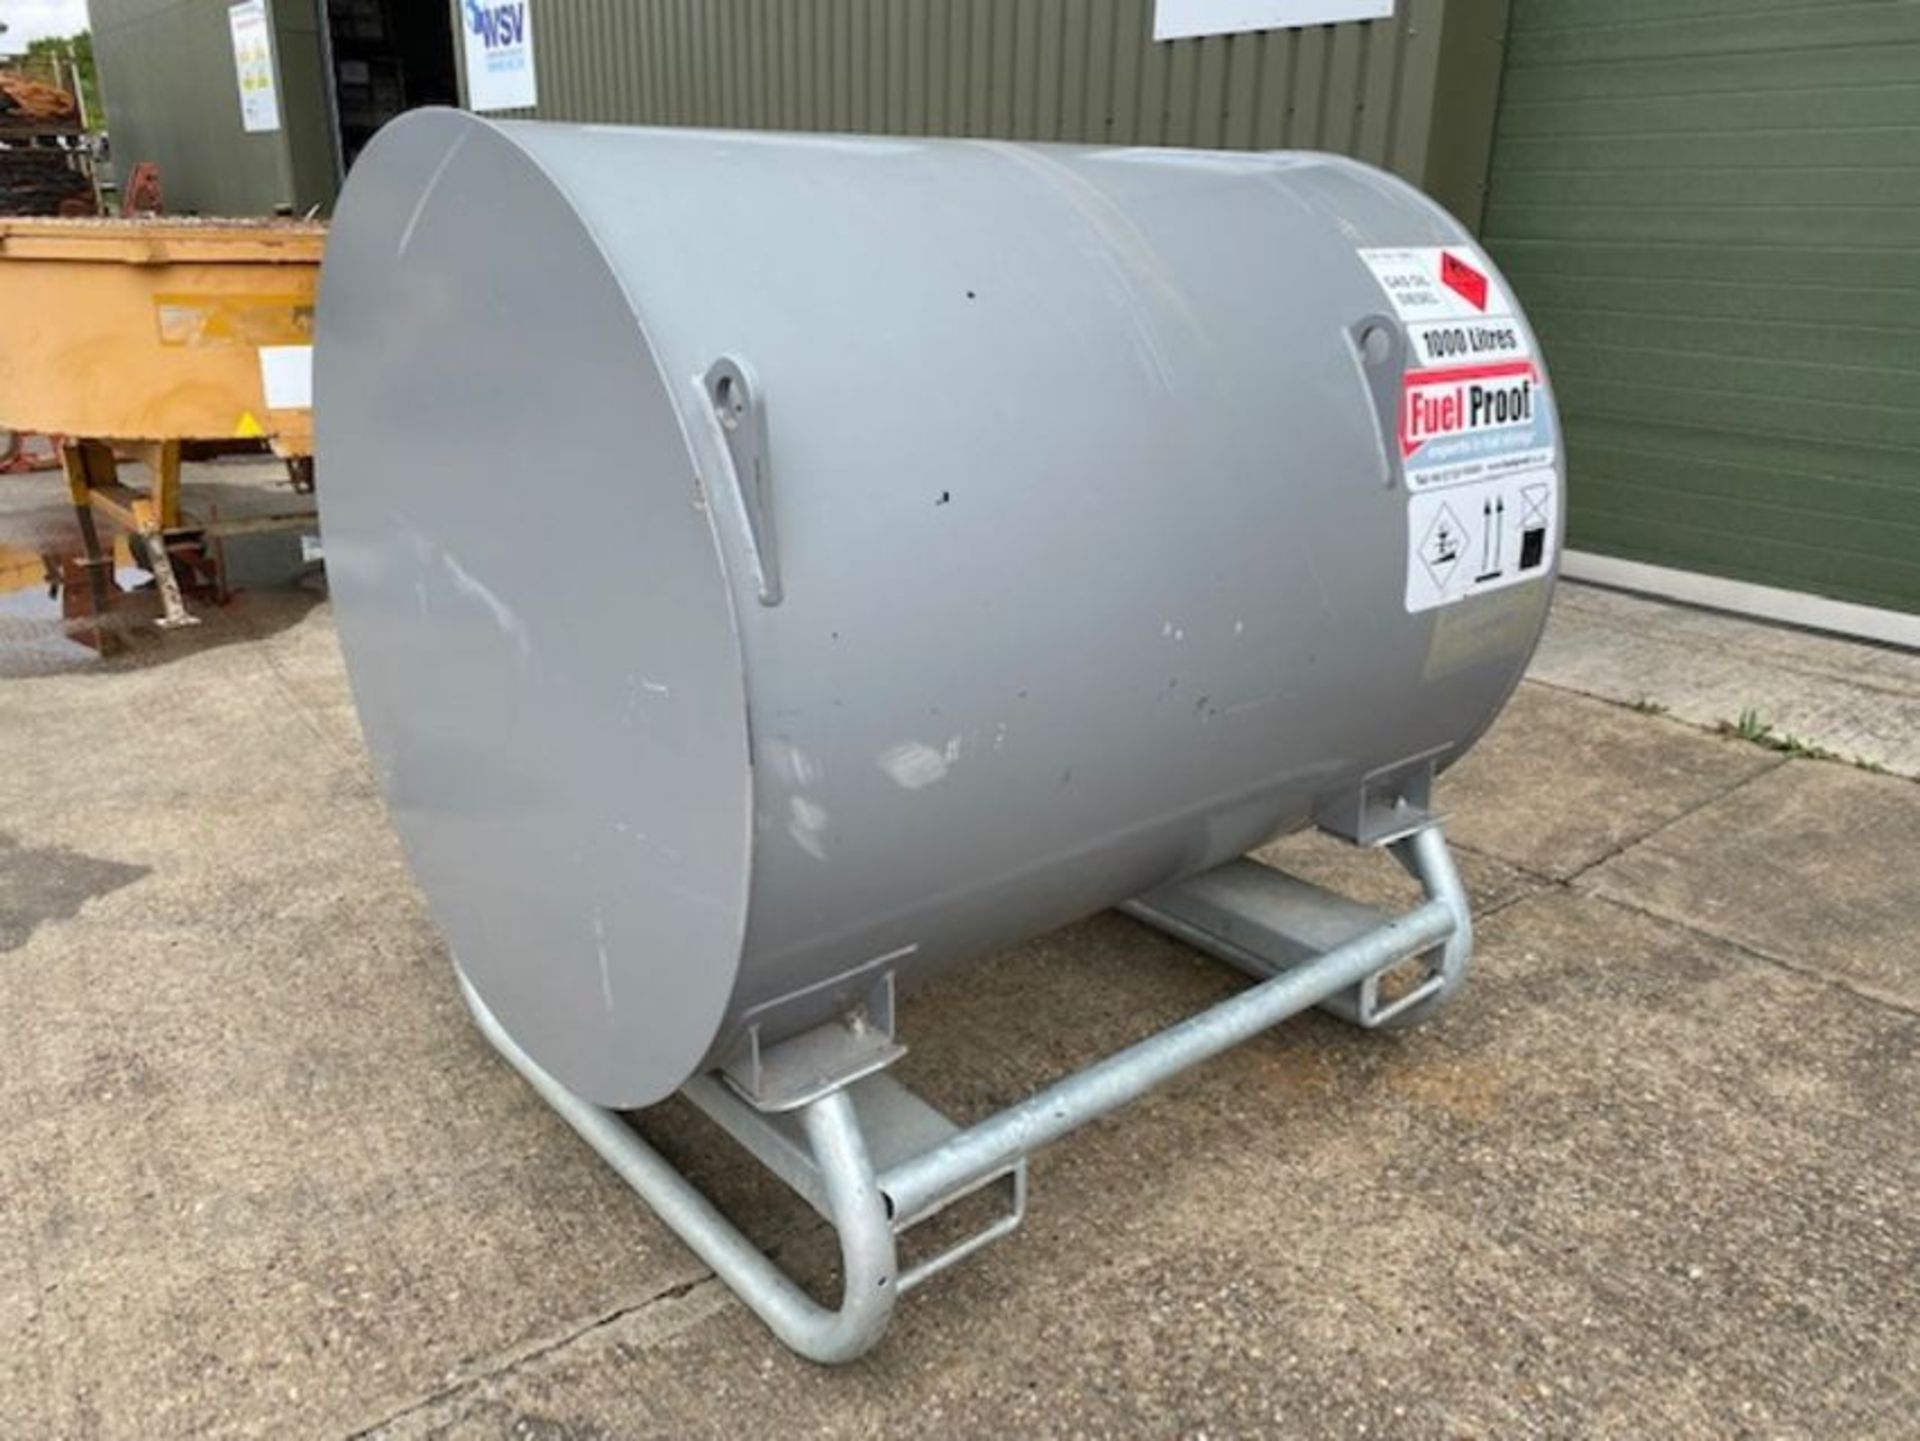 Fuelproof 1000 litre bunded fuel tank - Image 3 of 16